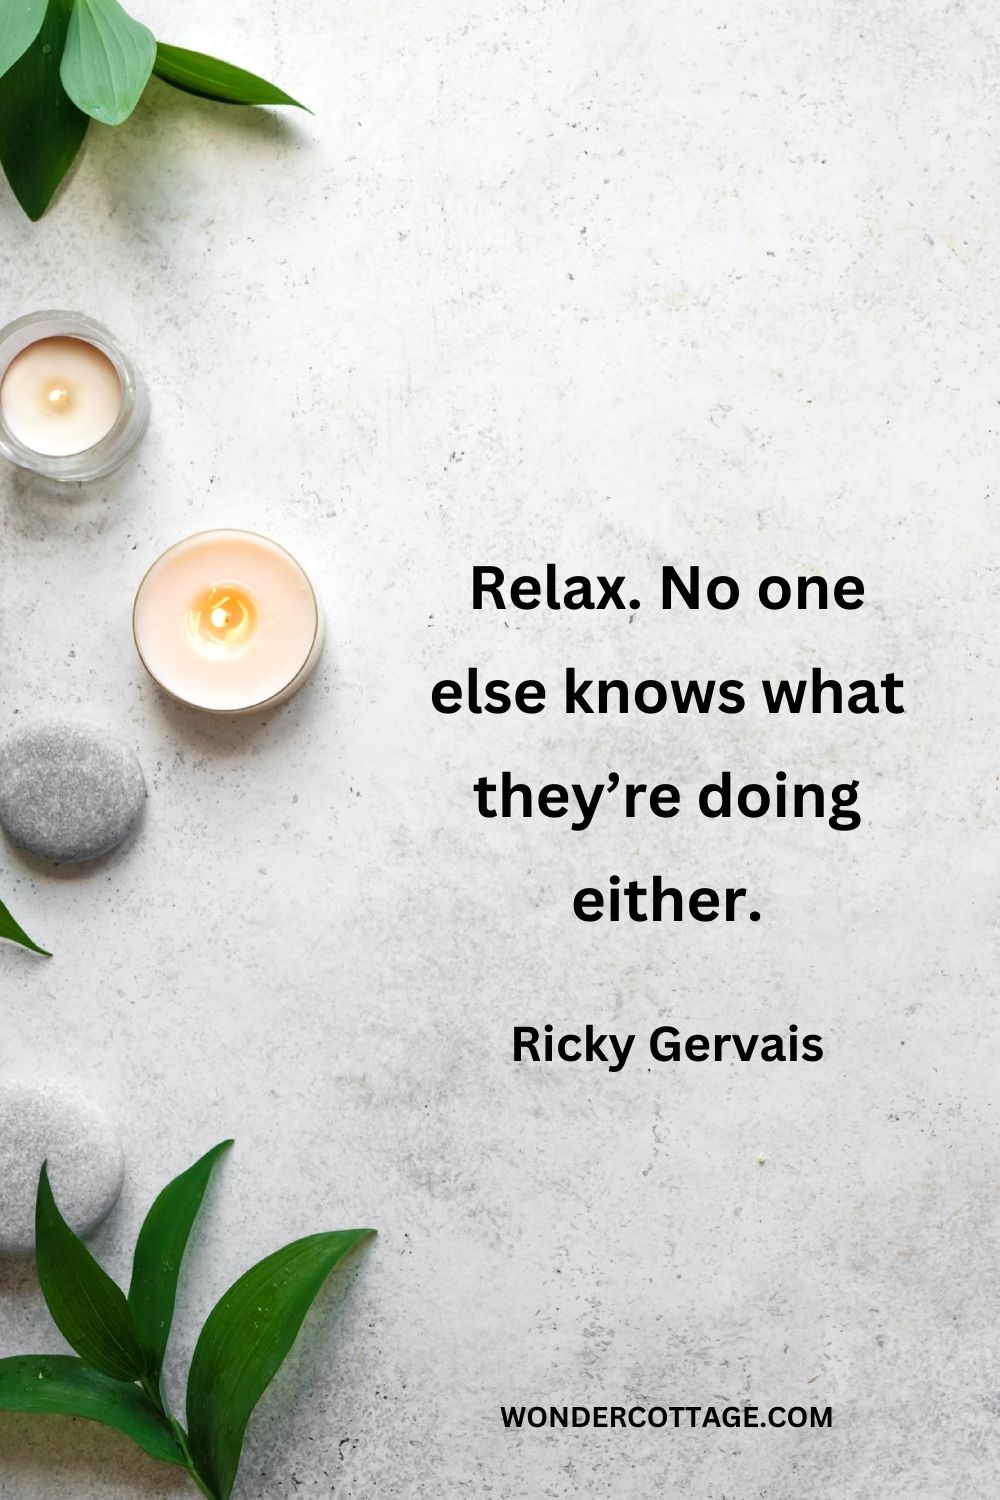 Relax. No one else knows what they’re doing either. Ricky Gervais